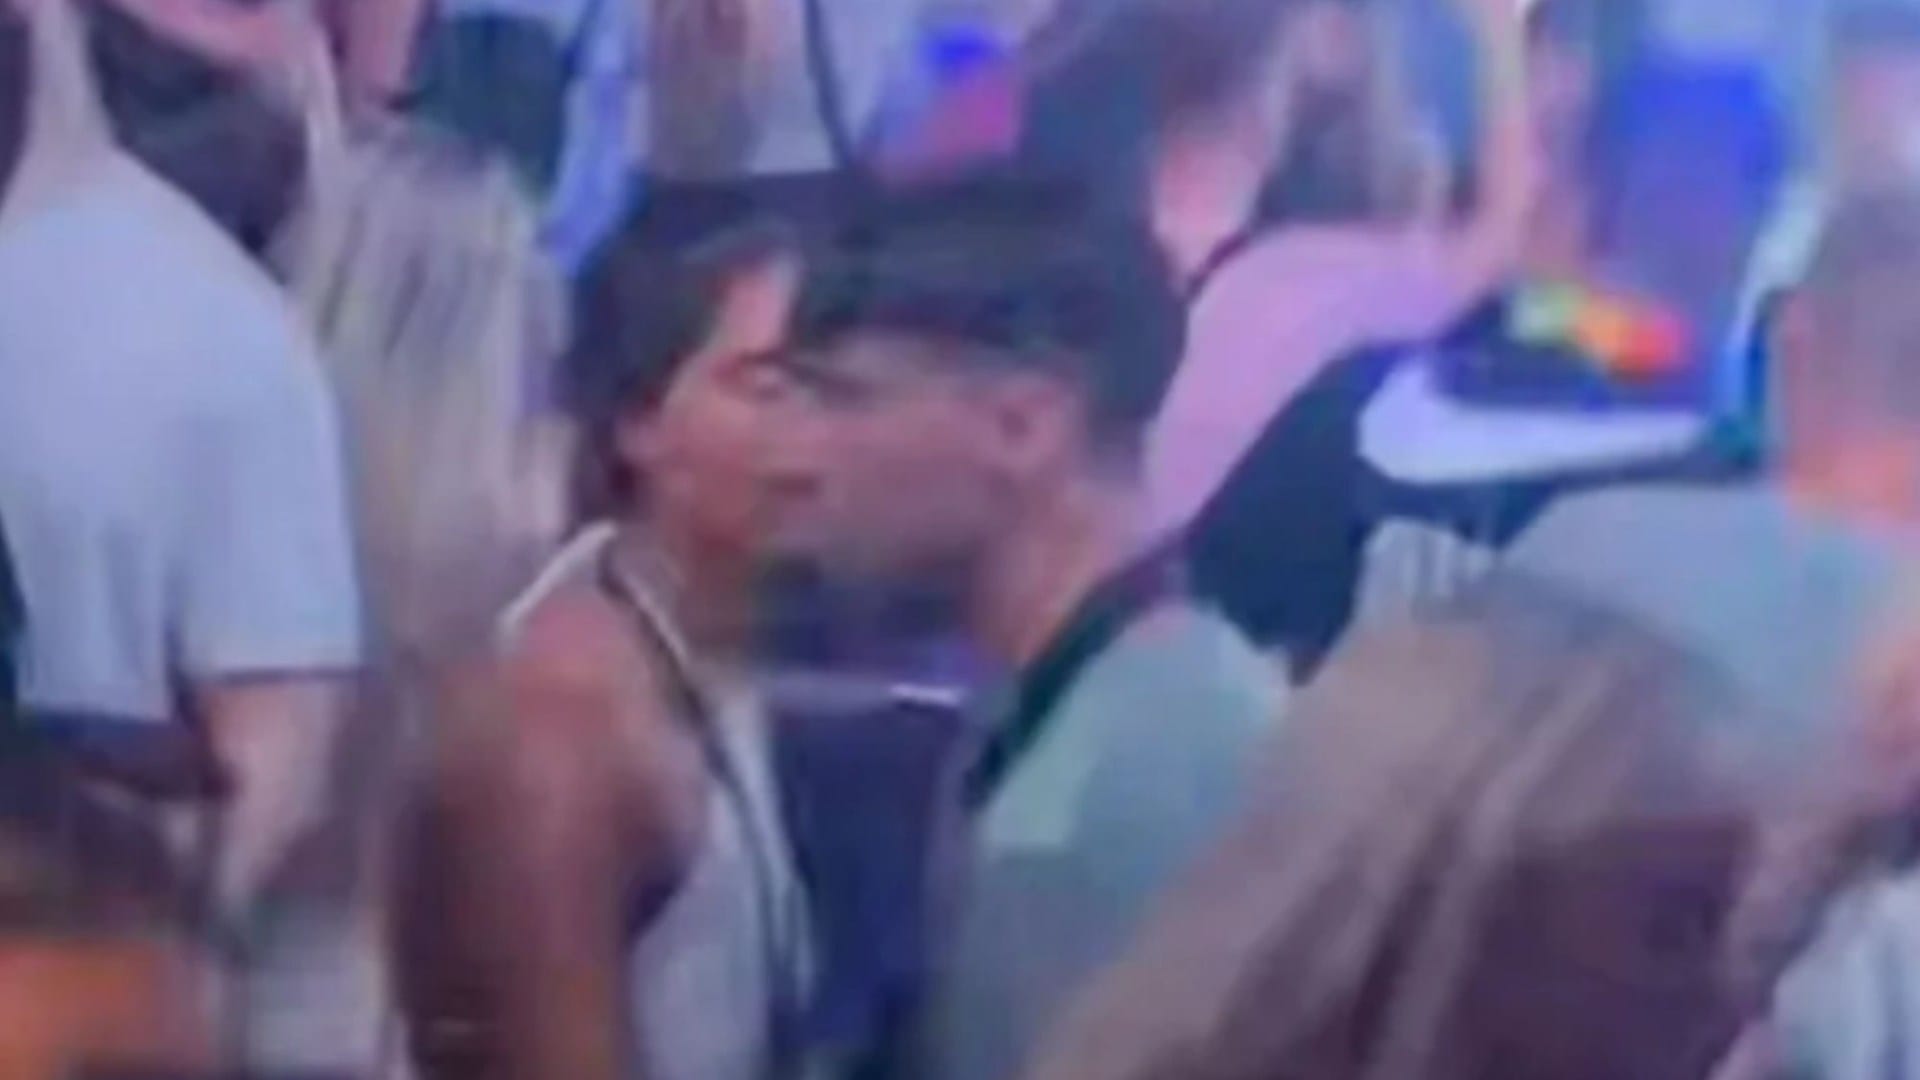 Shock new pic shows missing Jay Slater at packed Tenerife music rave just hours before he vanished as search continues